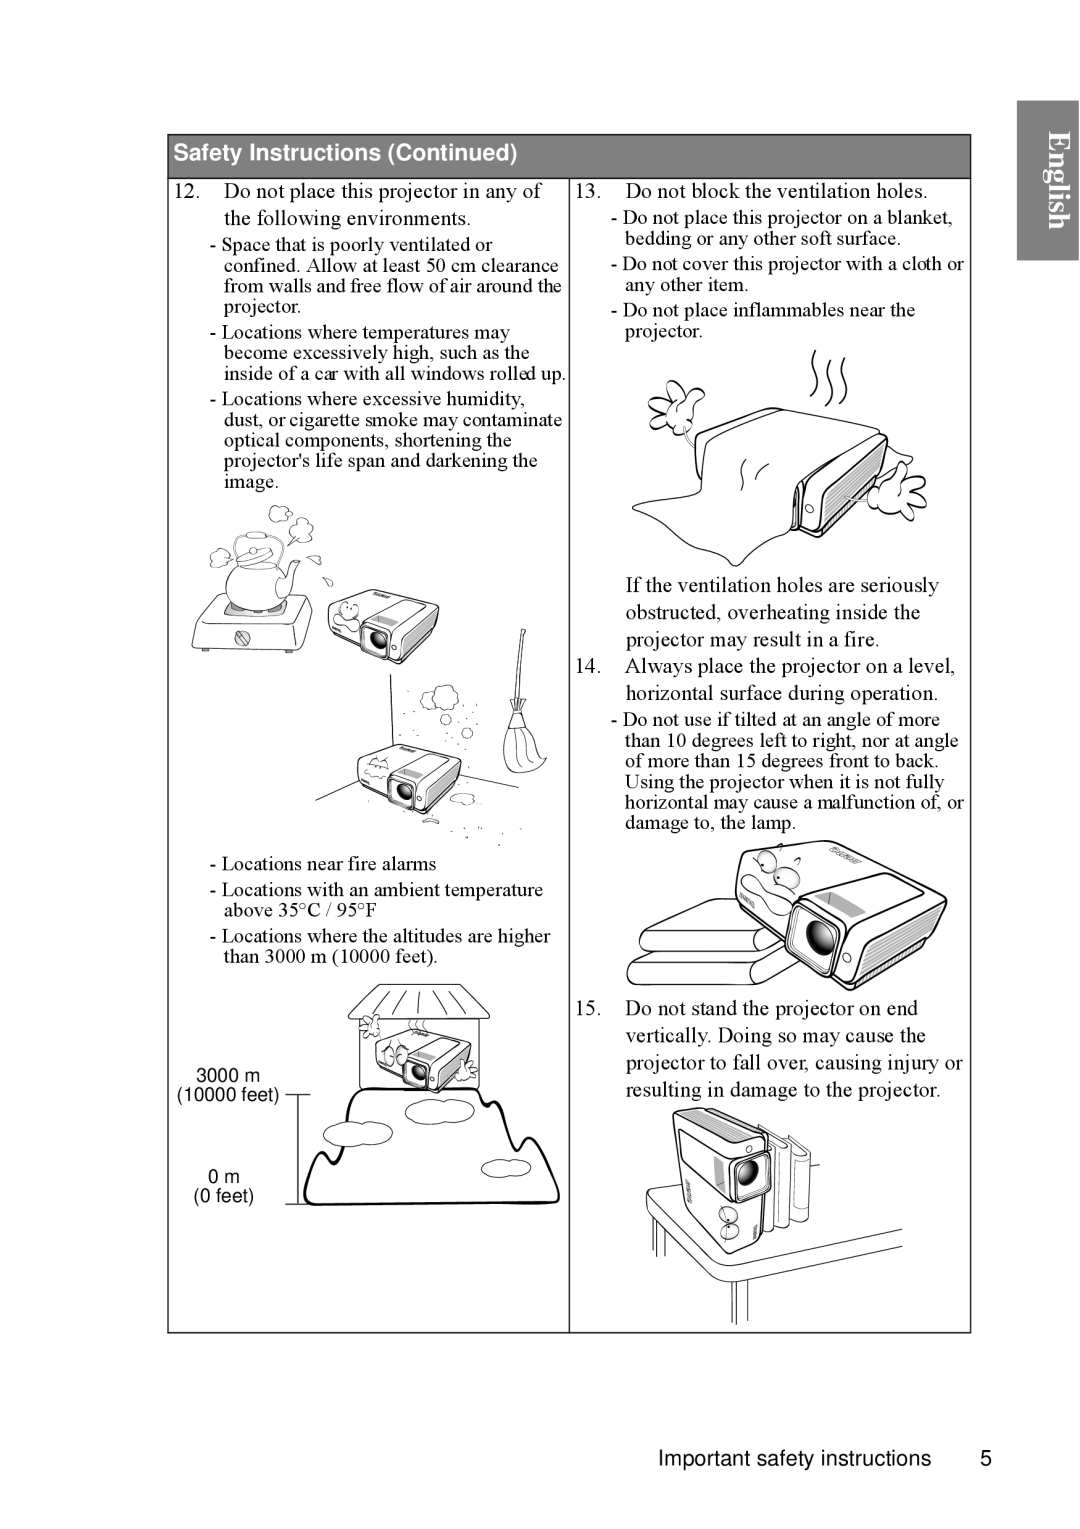 BenQ SP840 English, Safety Instructions Continued, Do not place this projector in any of the following environments 